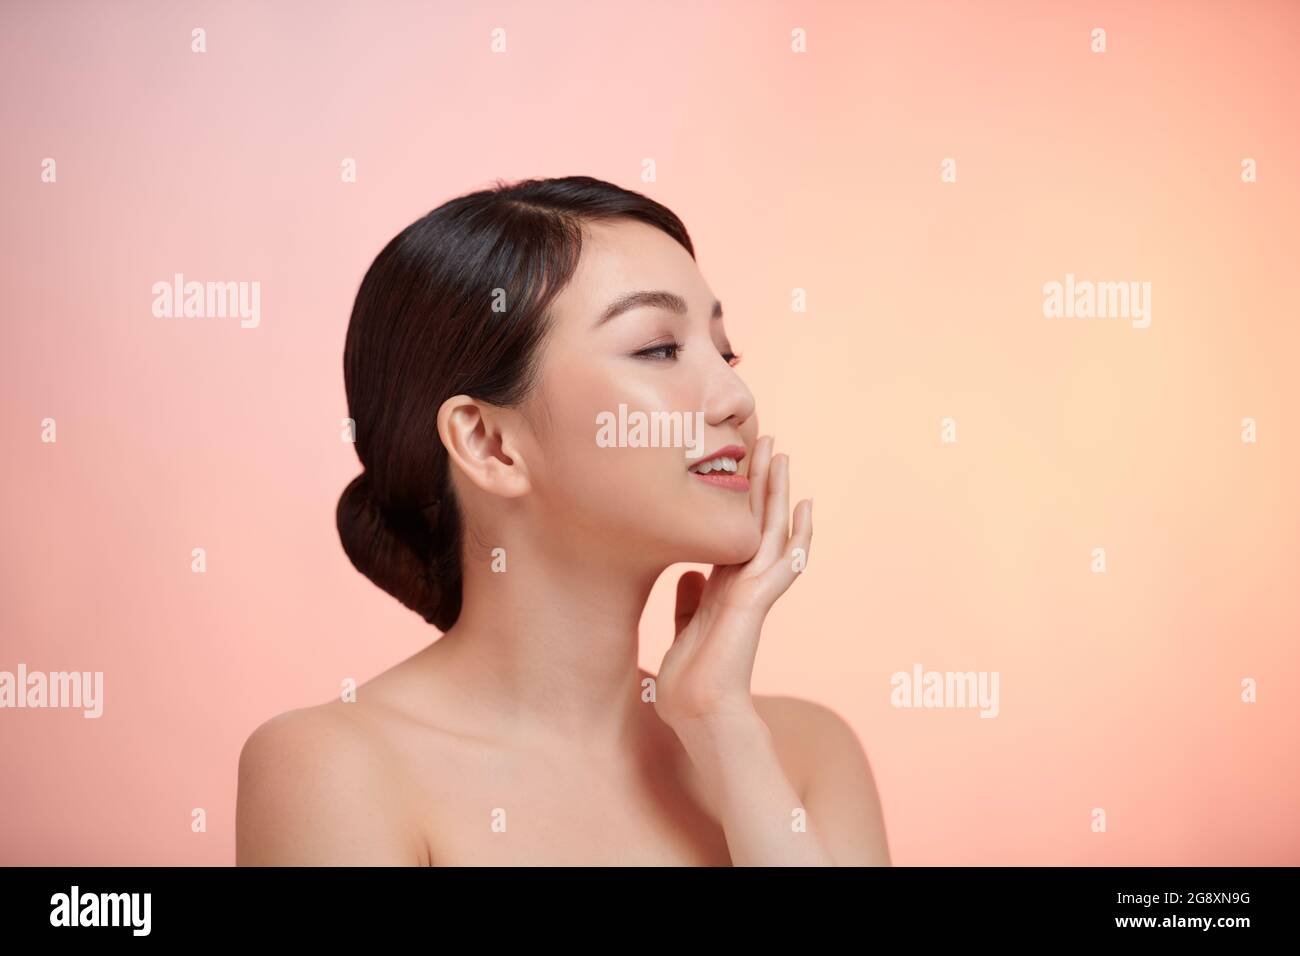 Asian young woman portrait. Skin care,Beauty treatment and spa concept. Stock Photo